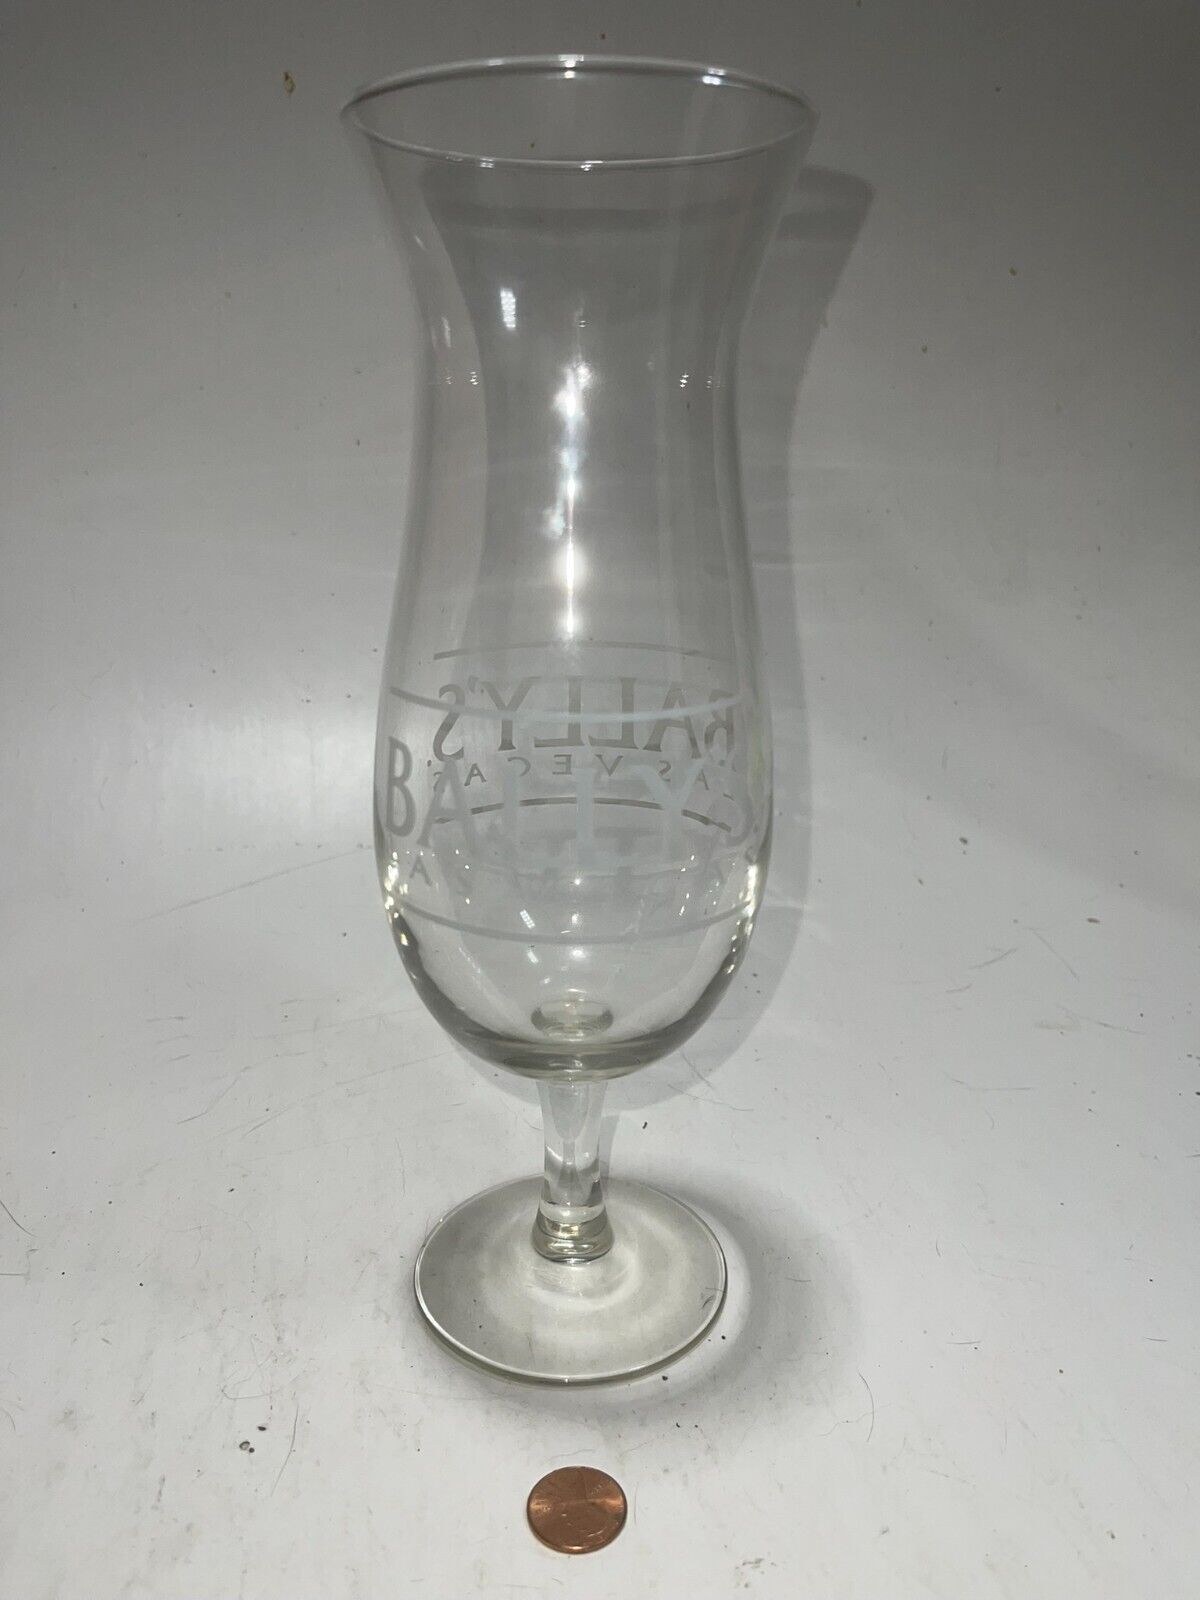 Bally's Las Vegas Cocktail Glass 9.75in